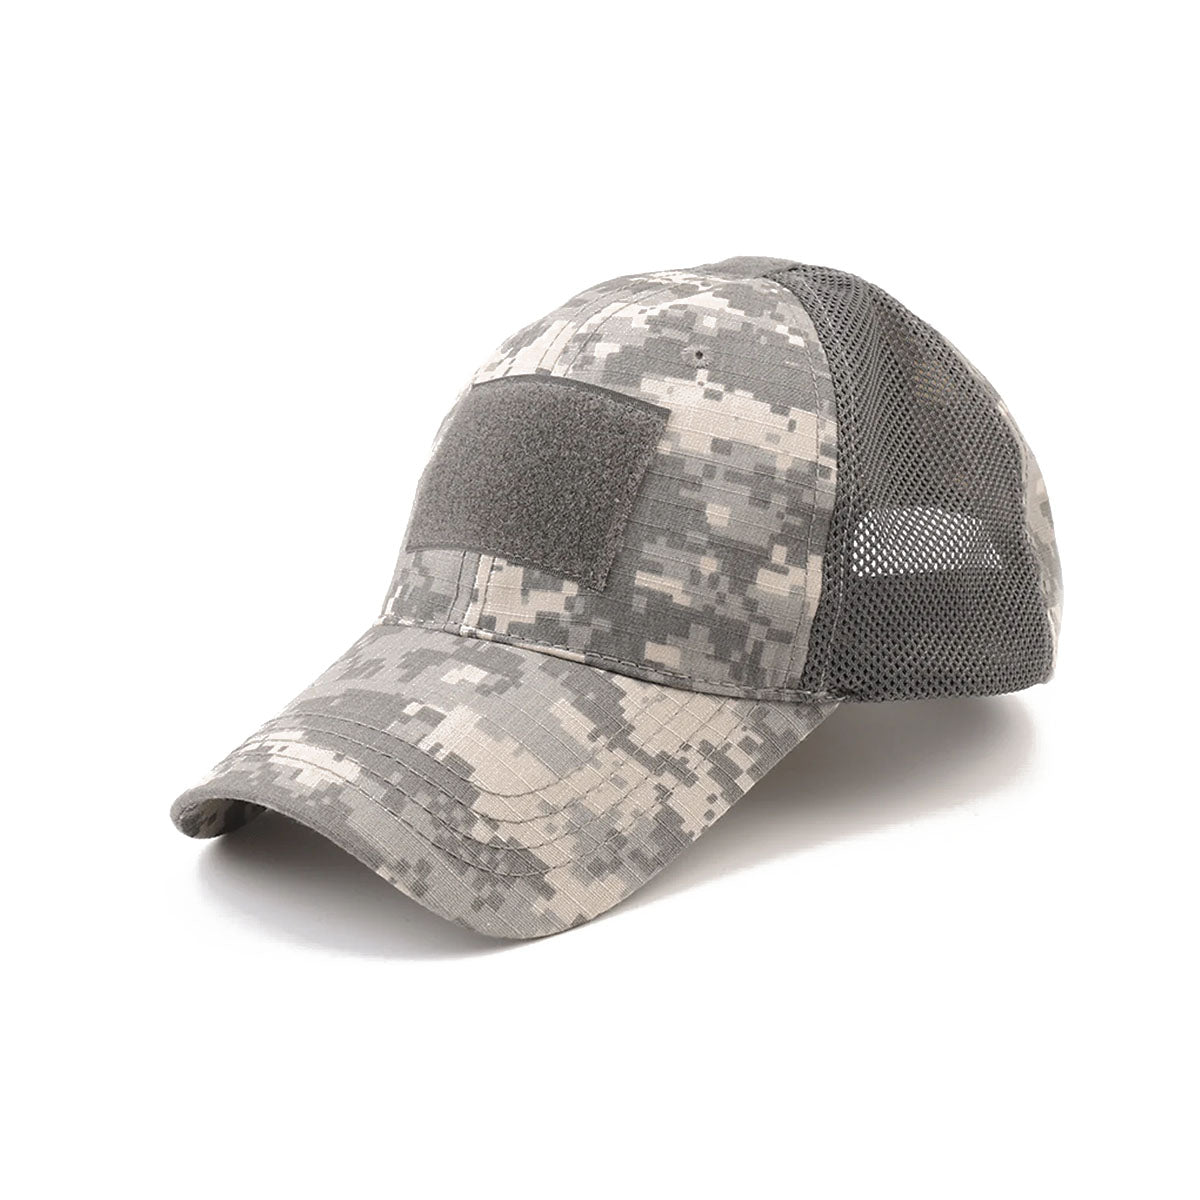 Tactical-Style Patch Hat with Adjustable Strap